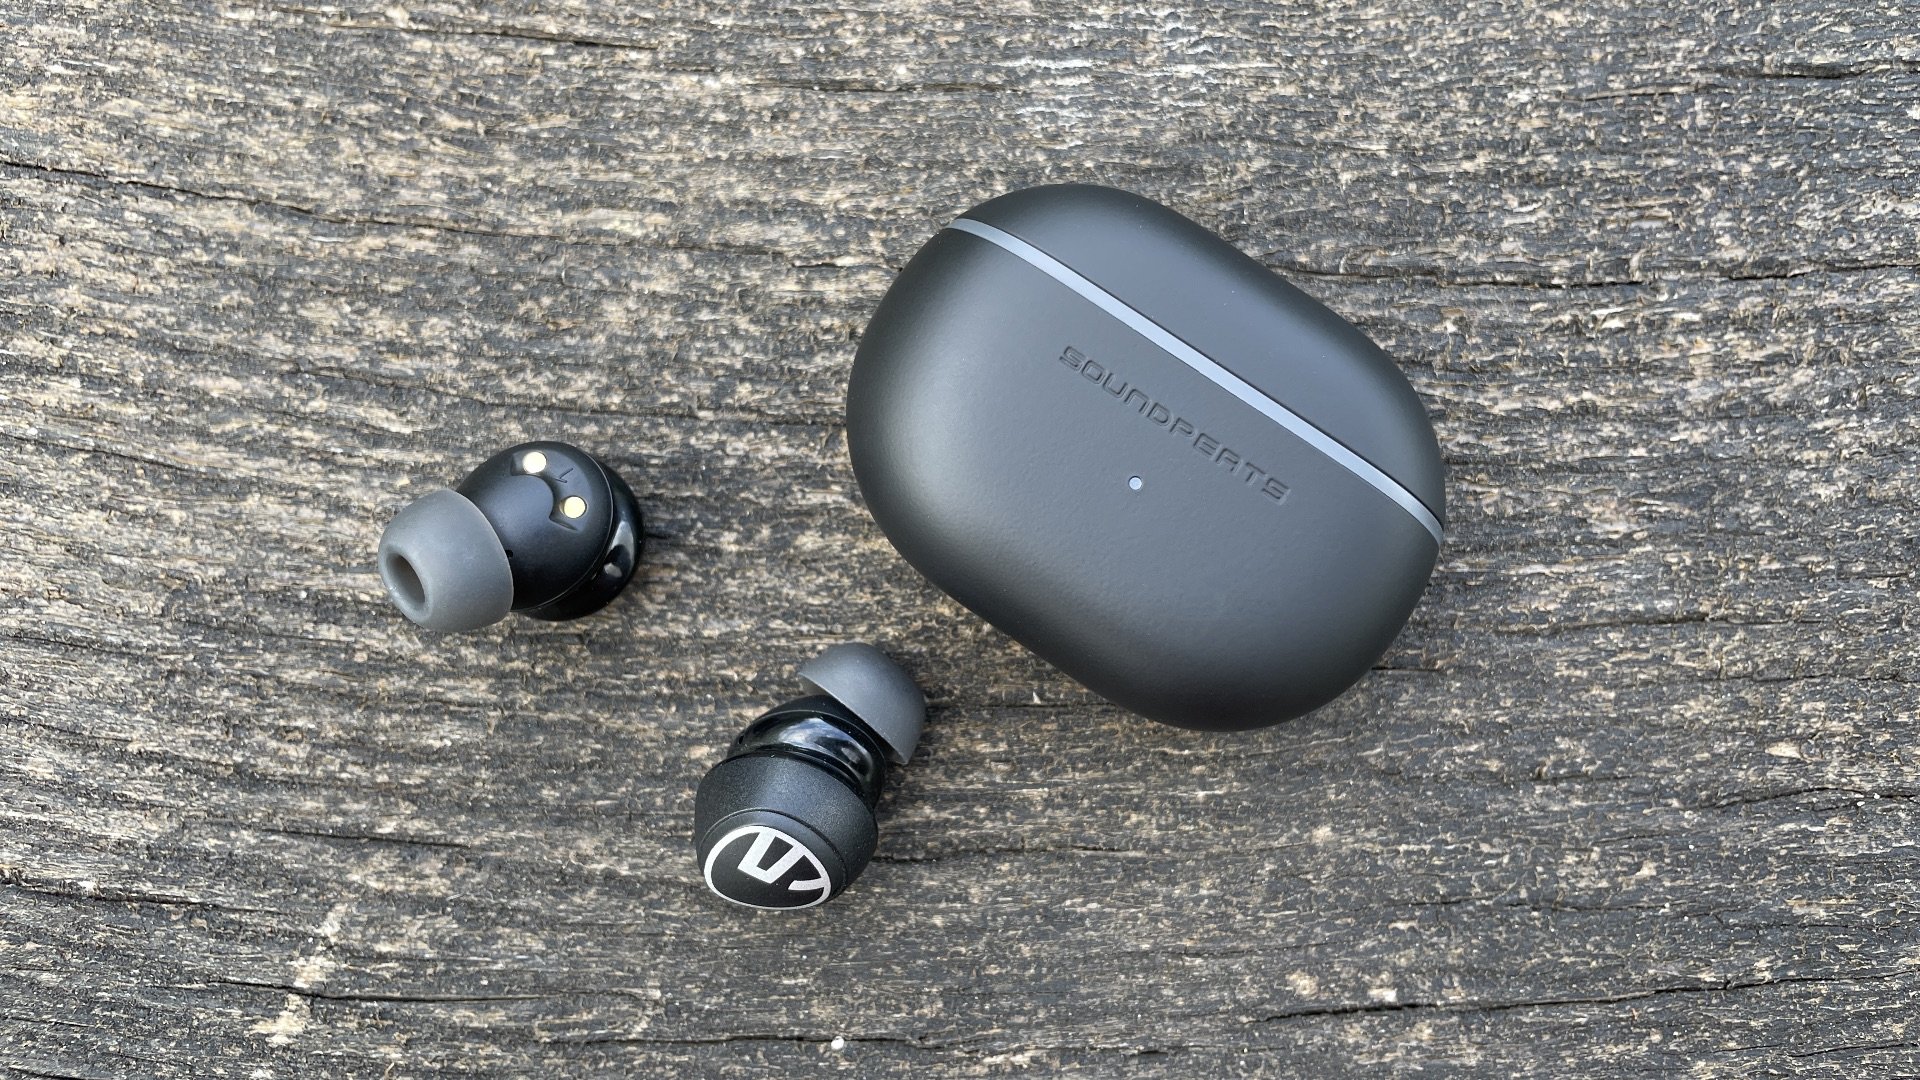 SoundPEATS Mini Pro review: All-around $50 earbuds